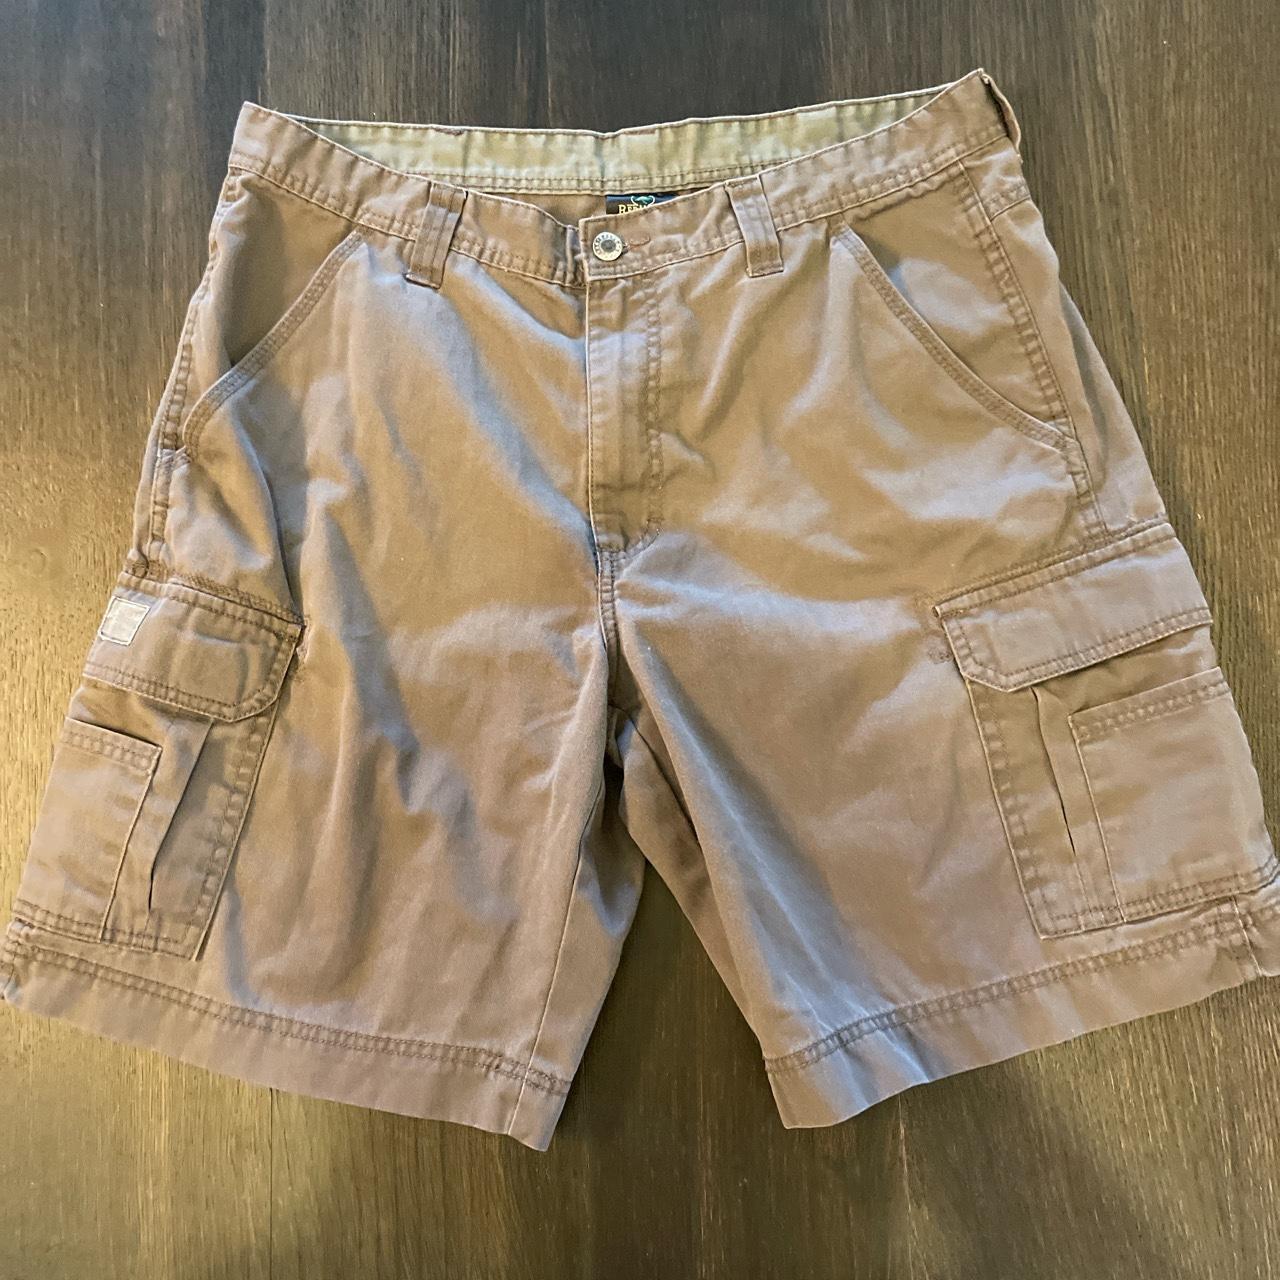 Redhead Cargo shorts No flaws or stains - Depop